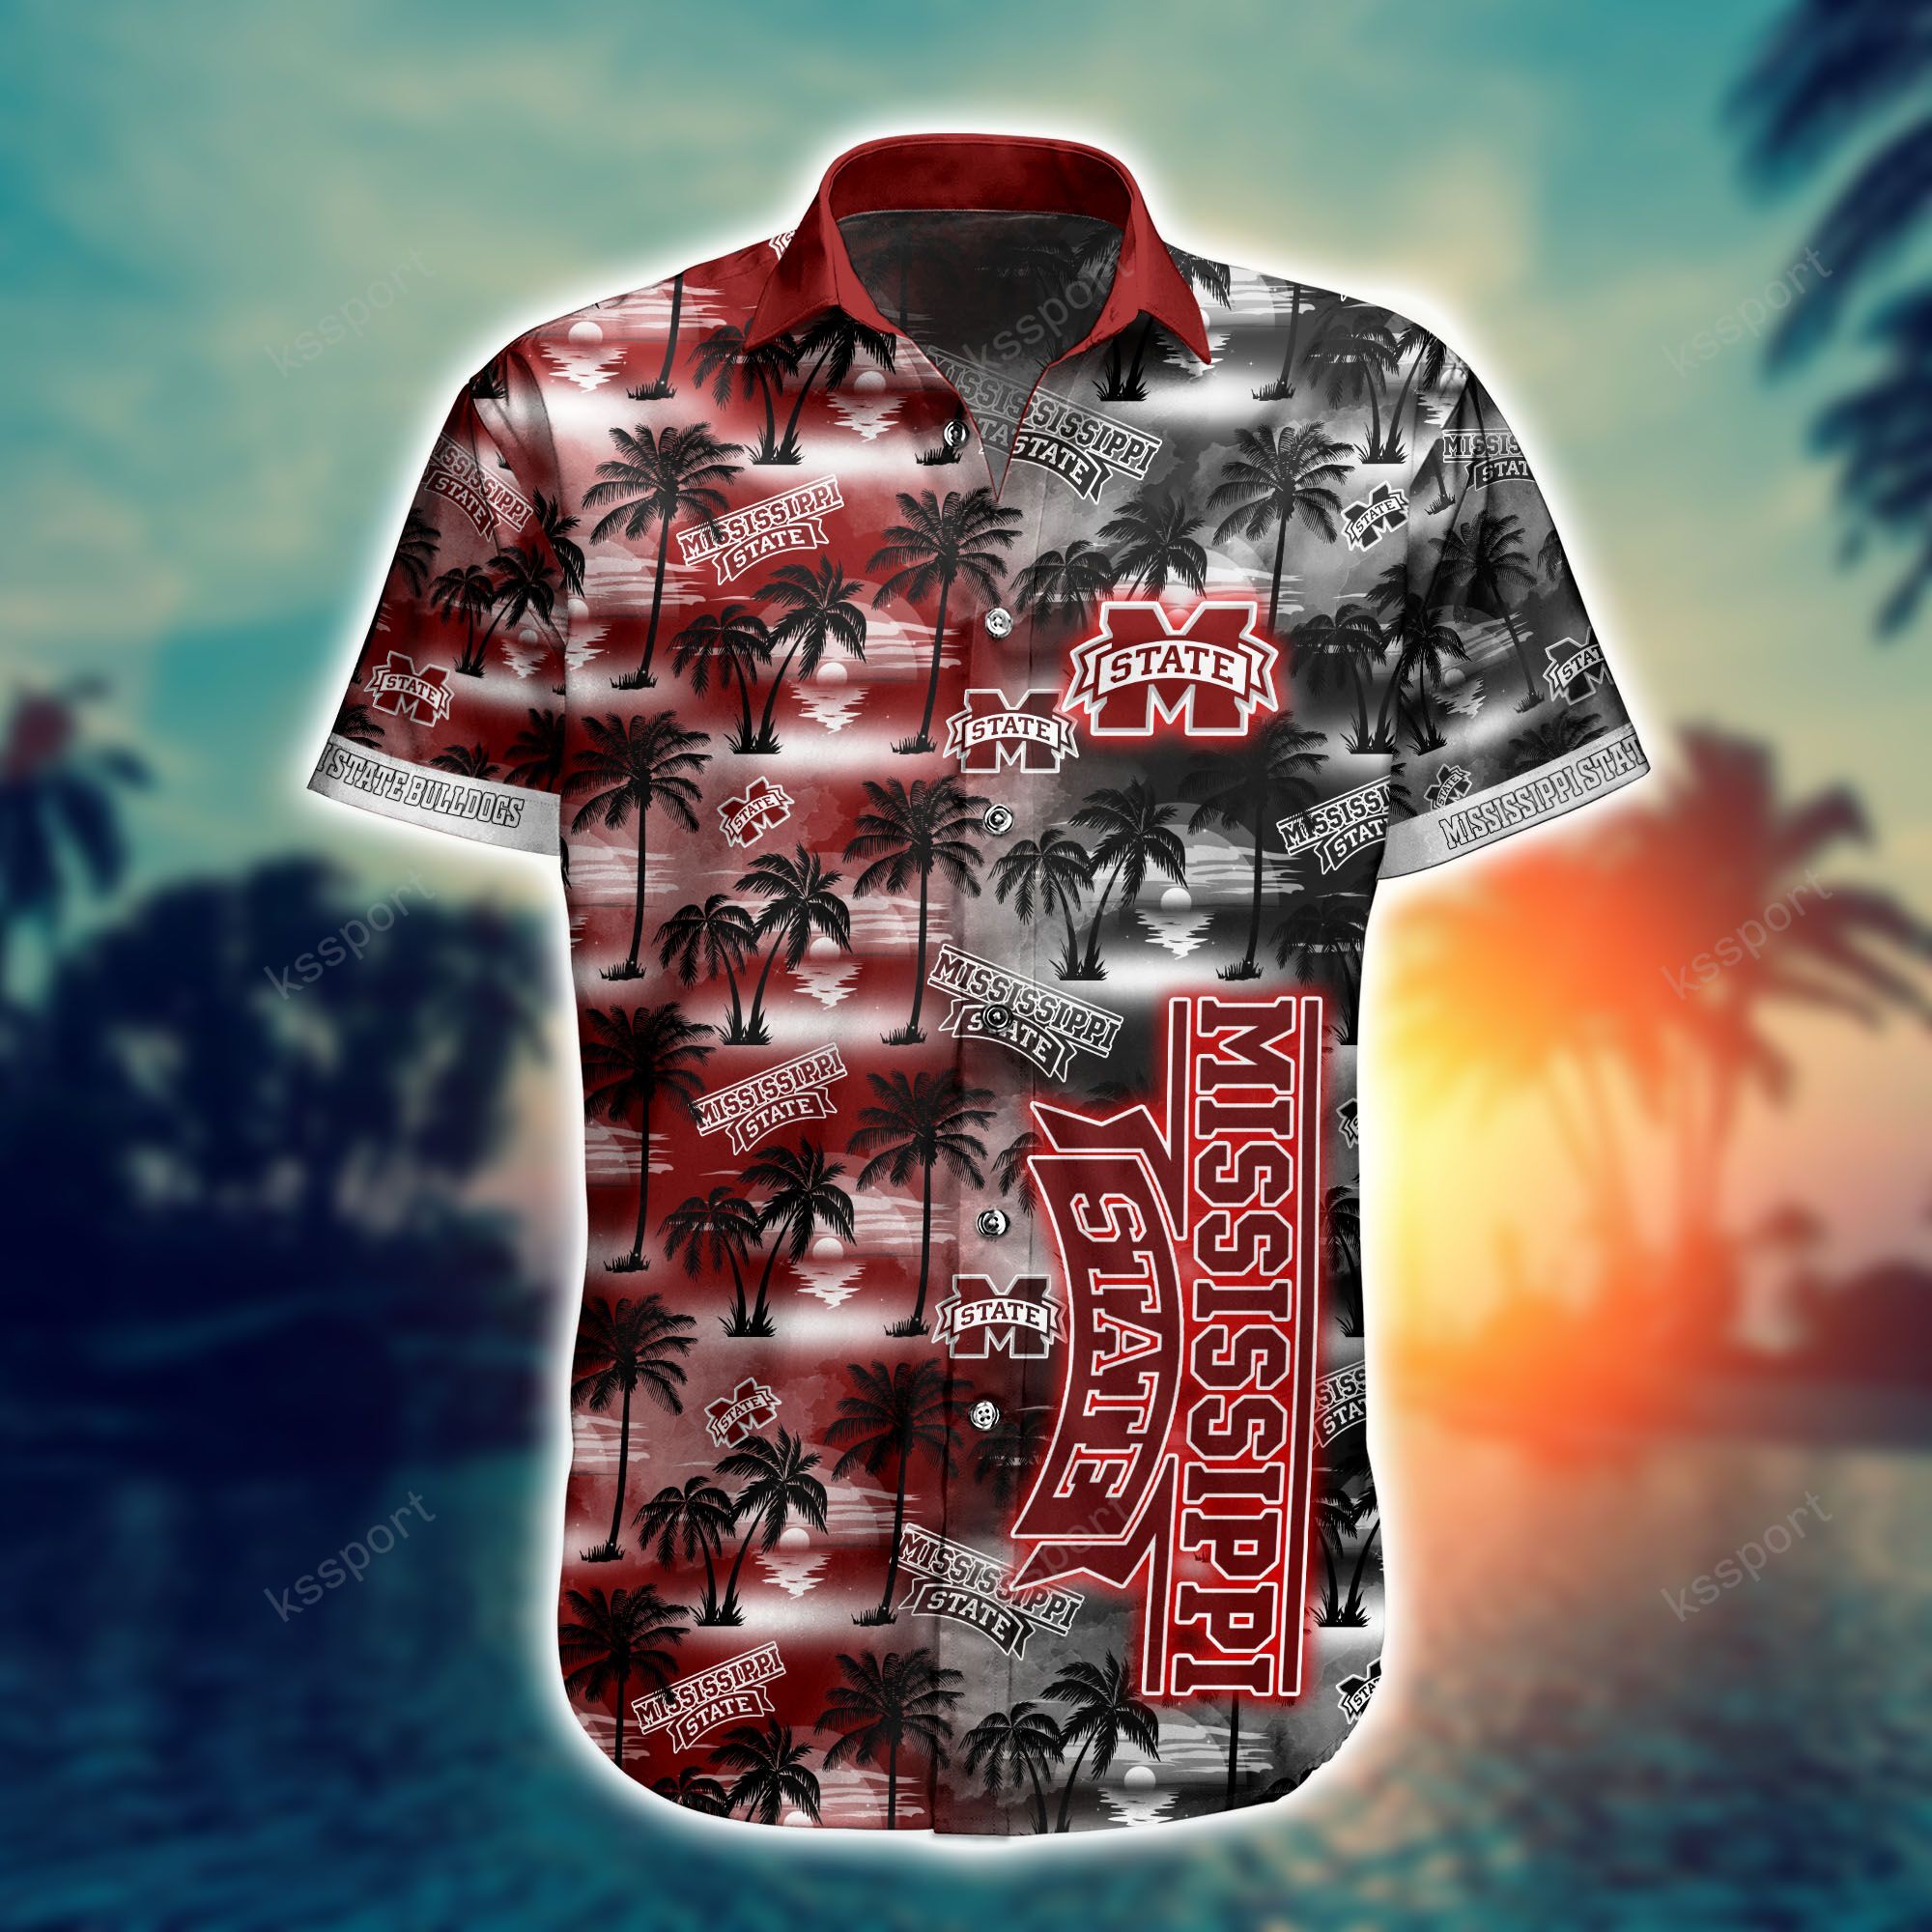 Top cool Hawaiian shirt 2022 - Make sure you get yours today before they run out! 152